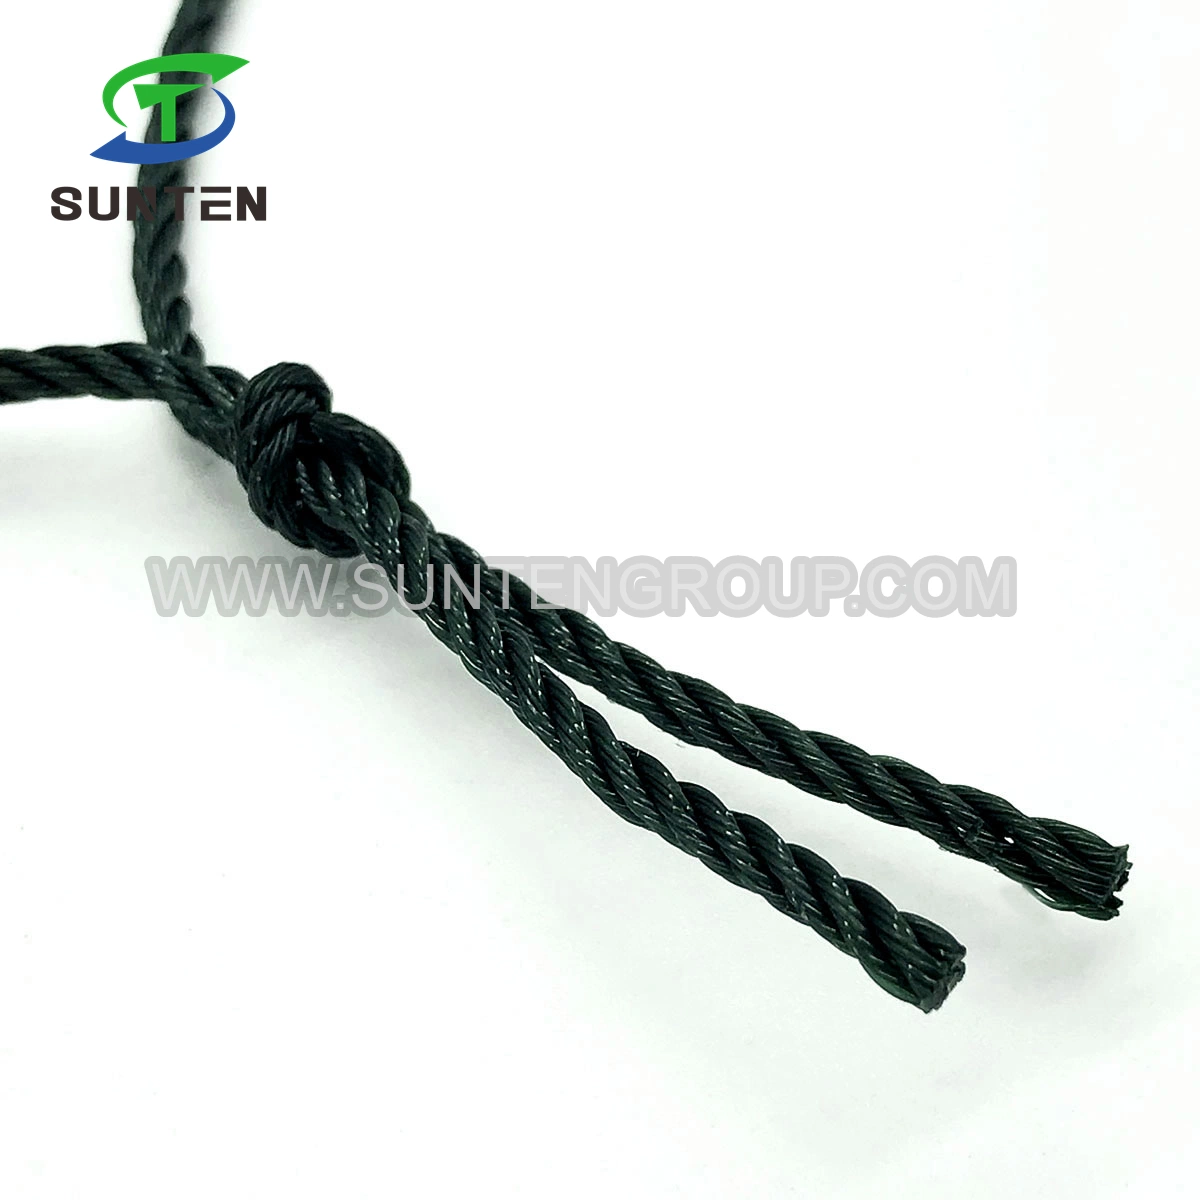 HDPE/PE/Polyethylene Knotted Fish/Fishing Net for South East Asia (Indonesia, Malaysia, Philippine)